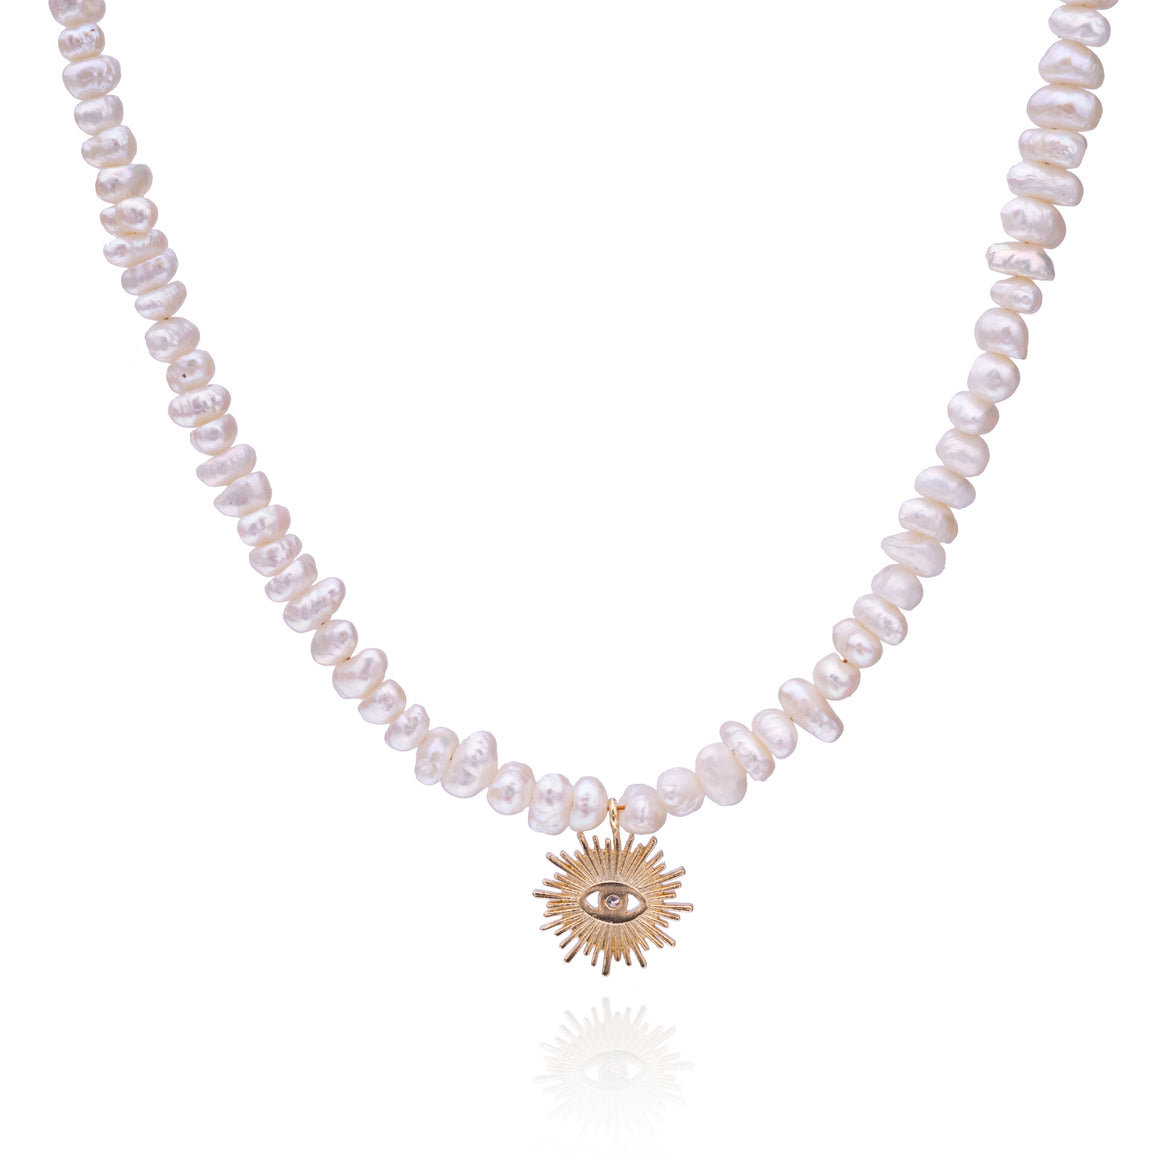 Light of Protection Pearl Necklace